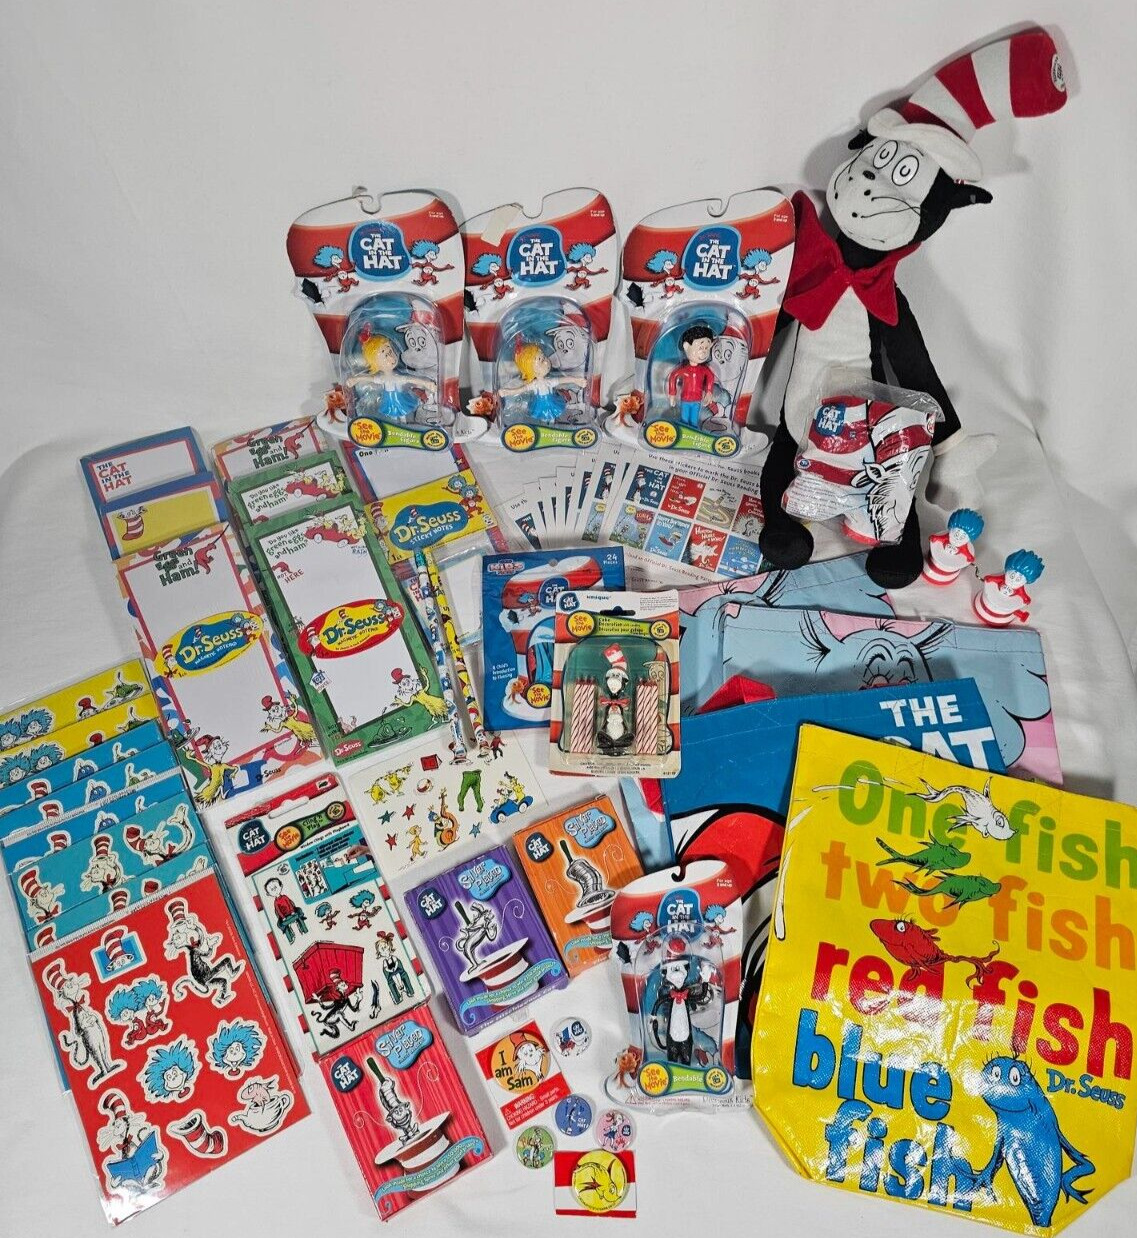 Dr. Suess lot of 50 items